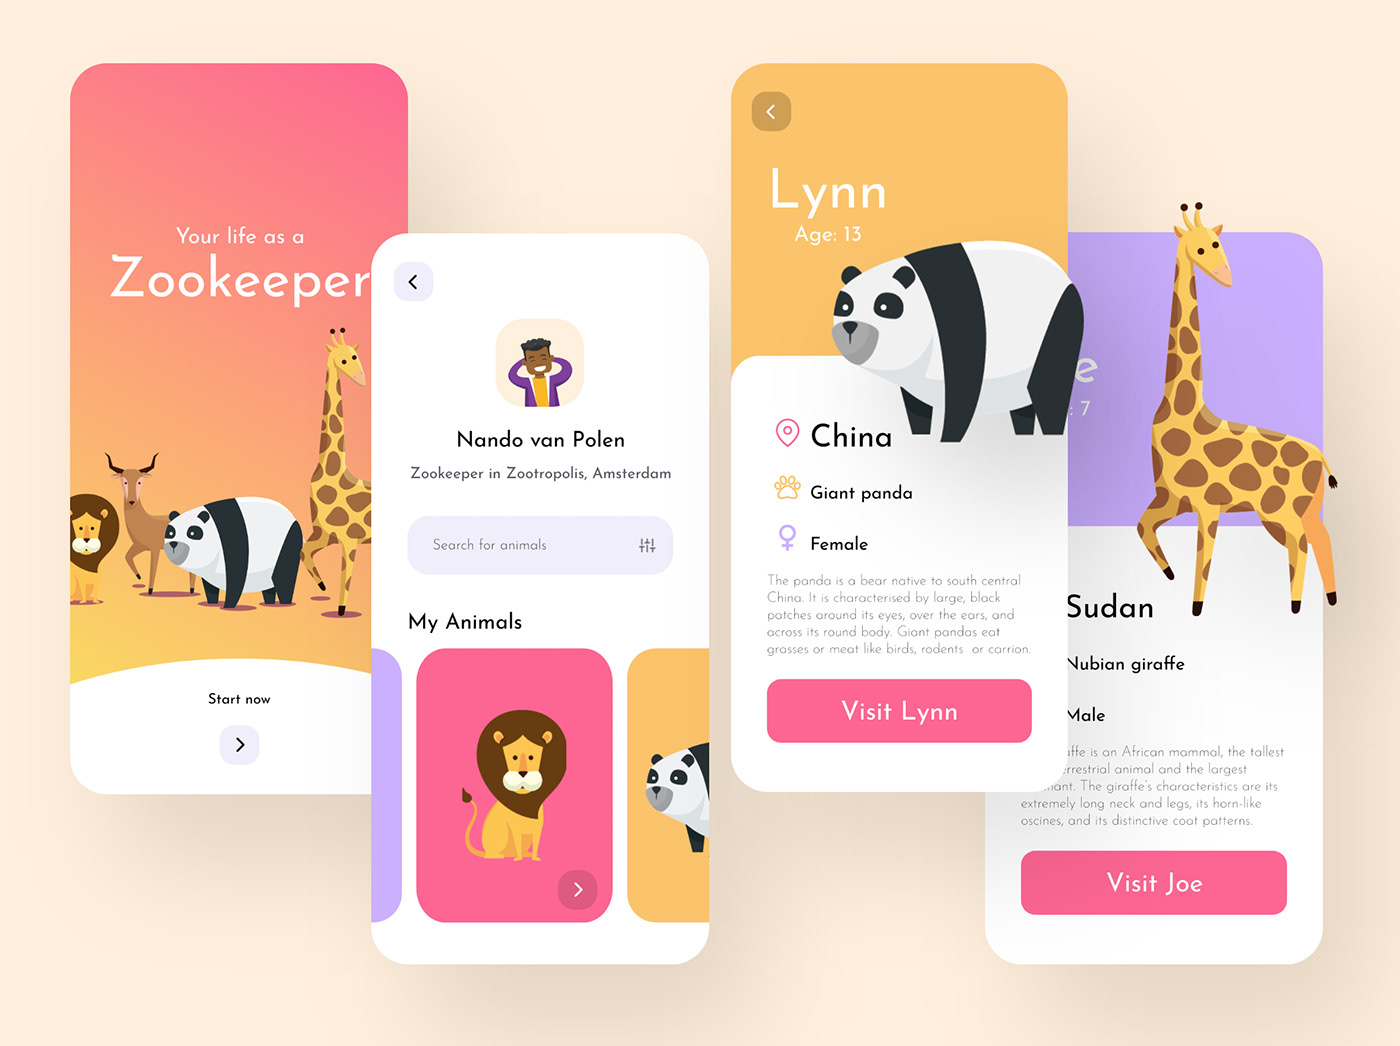 Your life as a Zookeeper is a clean and minimal app for kids learn more about animals